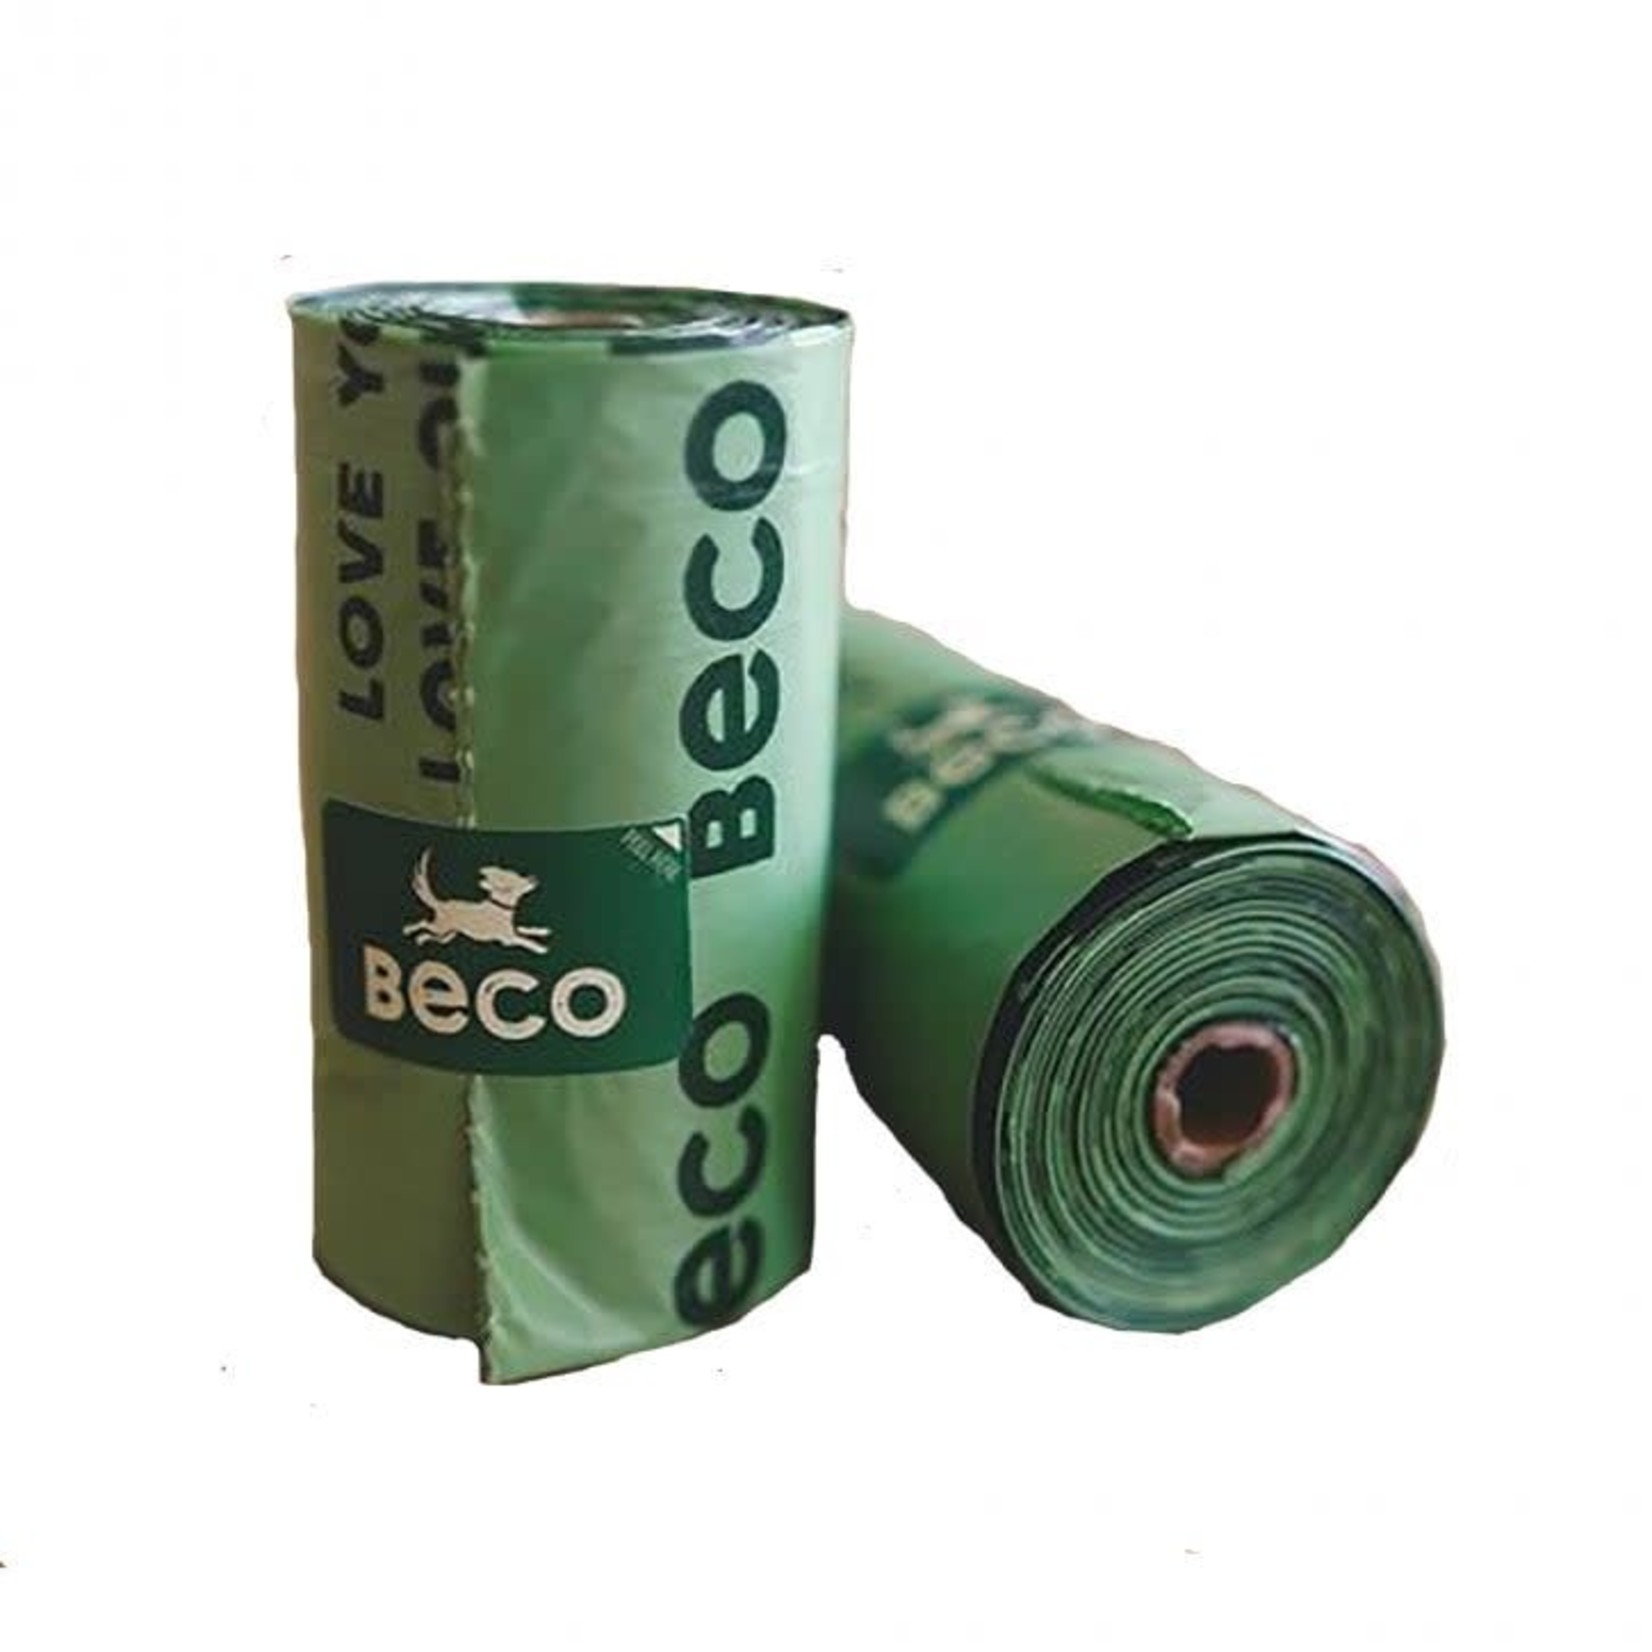 Beco Pets Beco Compostable Poop Bags - 12bag/roll